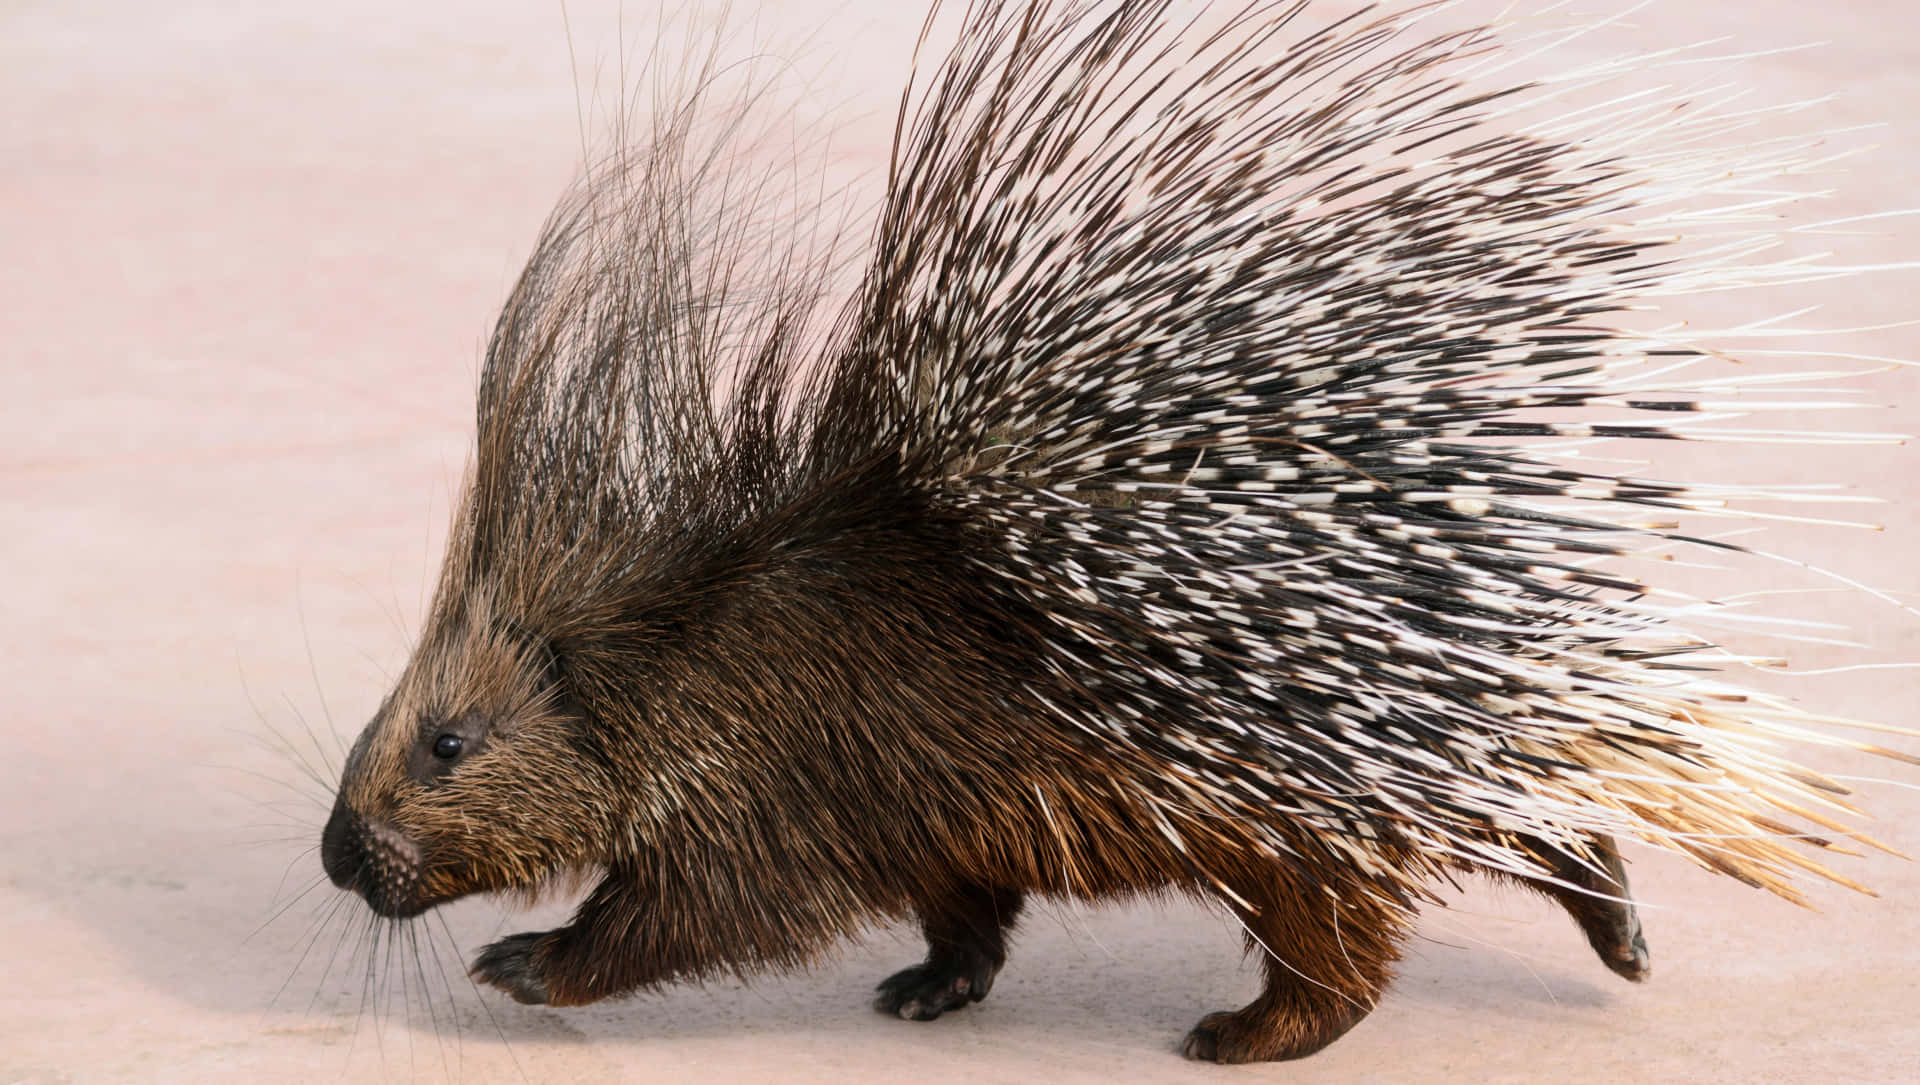 Porcupine On The Road Picture